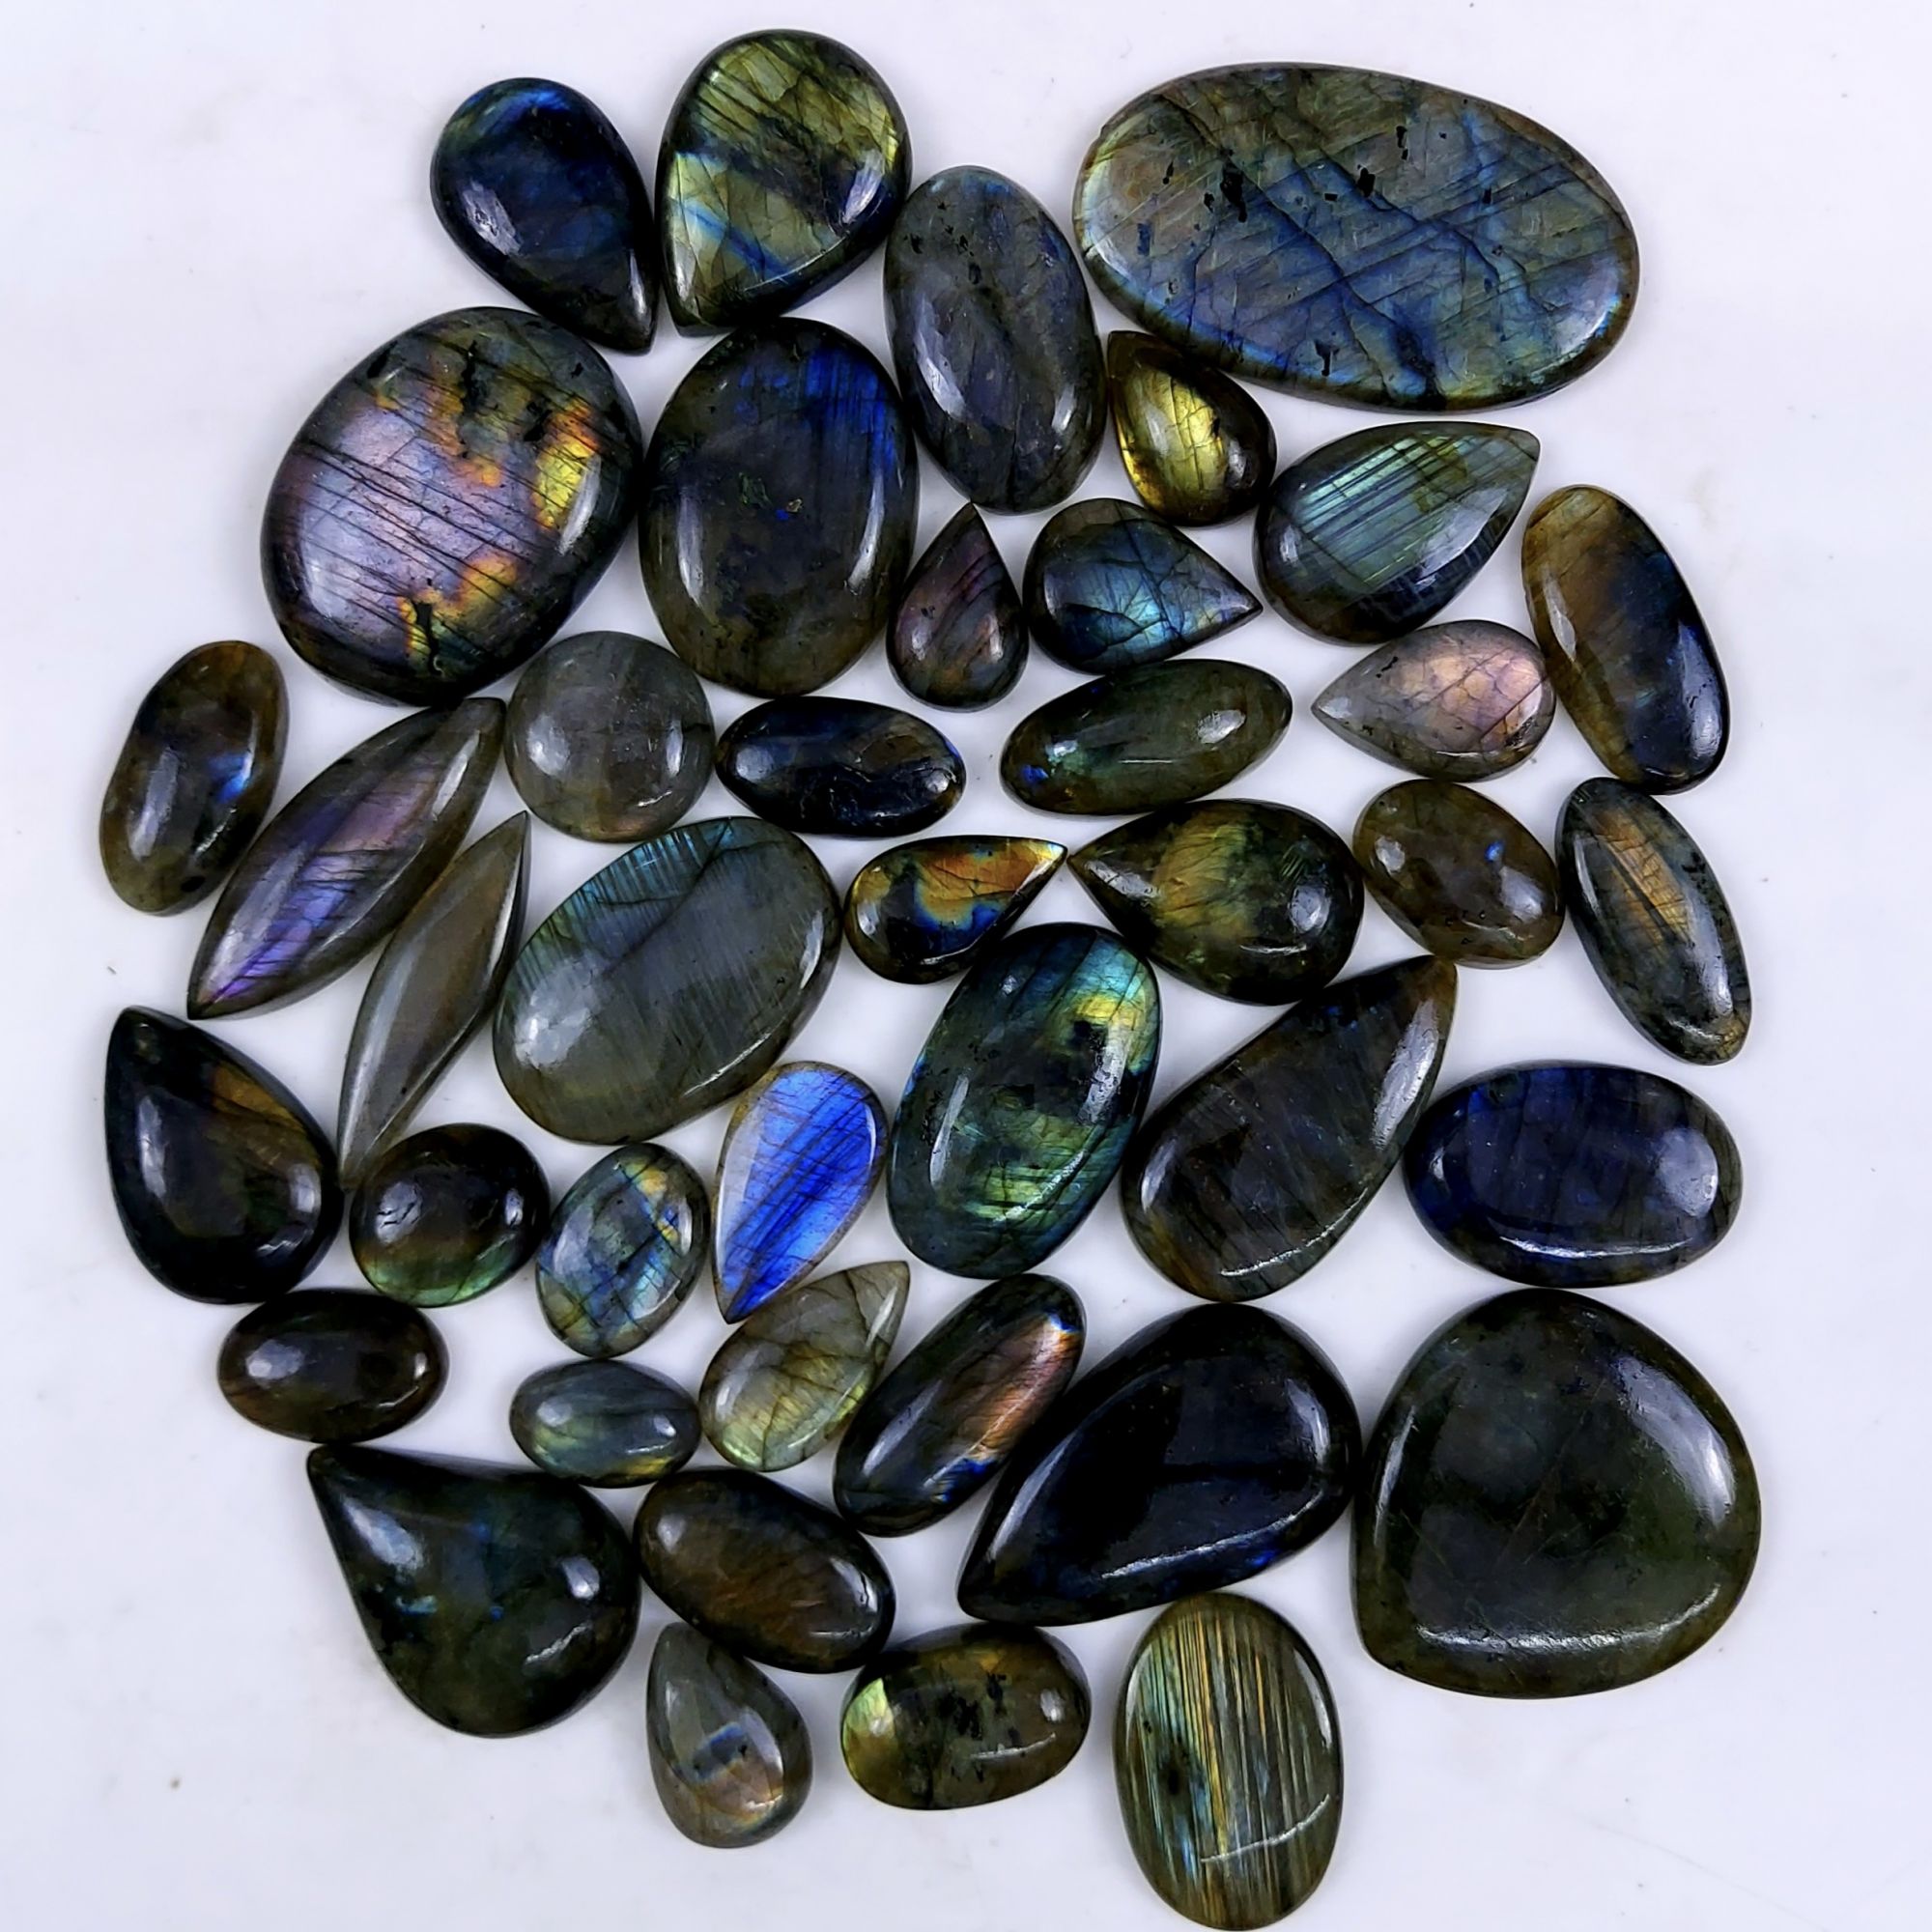 41pc 1500Cts Labradorite Cabochon Multifire Healing Crystal For Jewelry Supplies, Labradorite Necklace Handmade Wire Wrapped Gemstone Pendant 55x32 22x12mm#6391